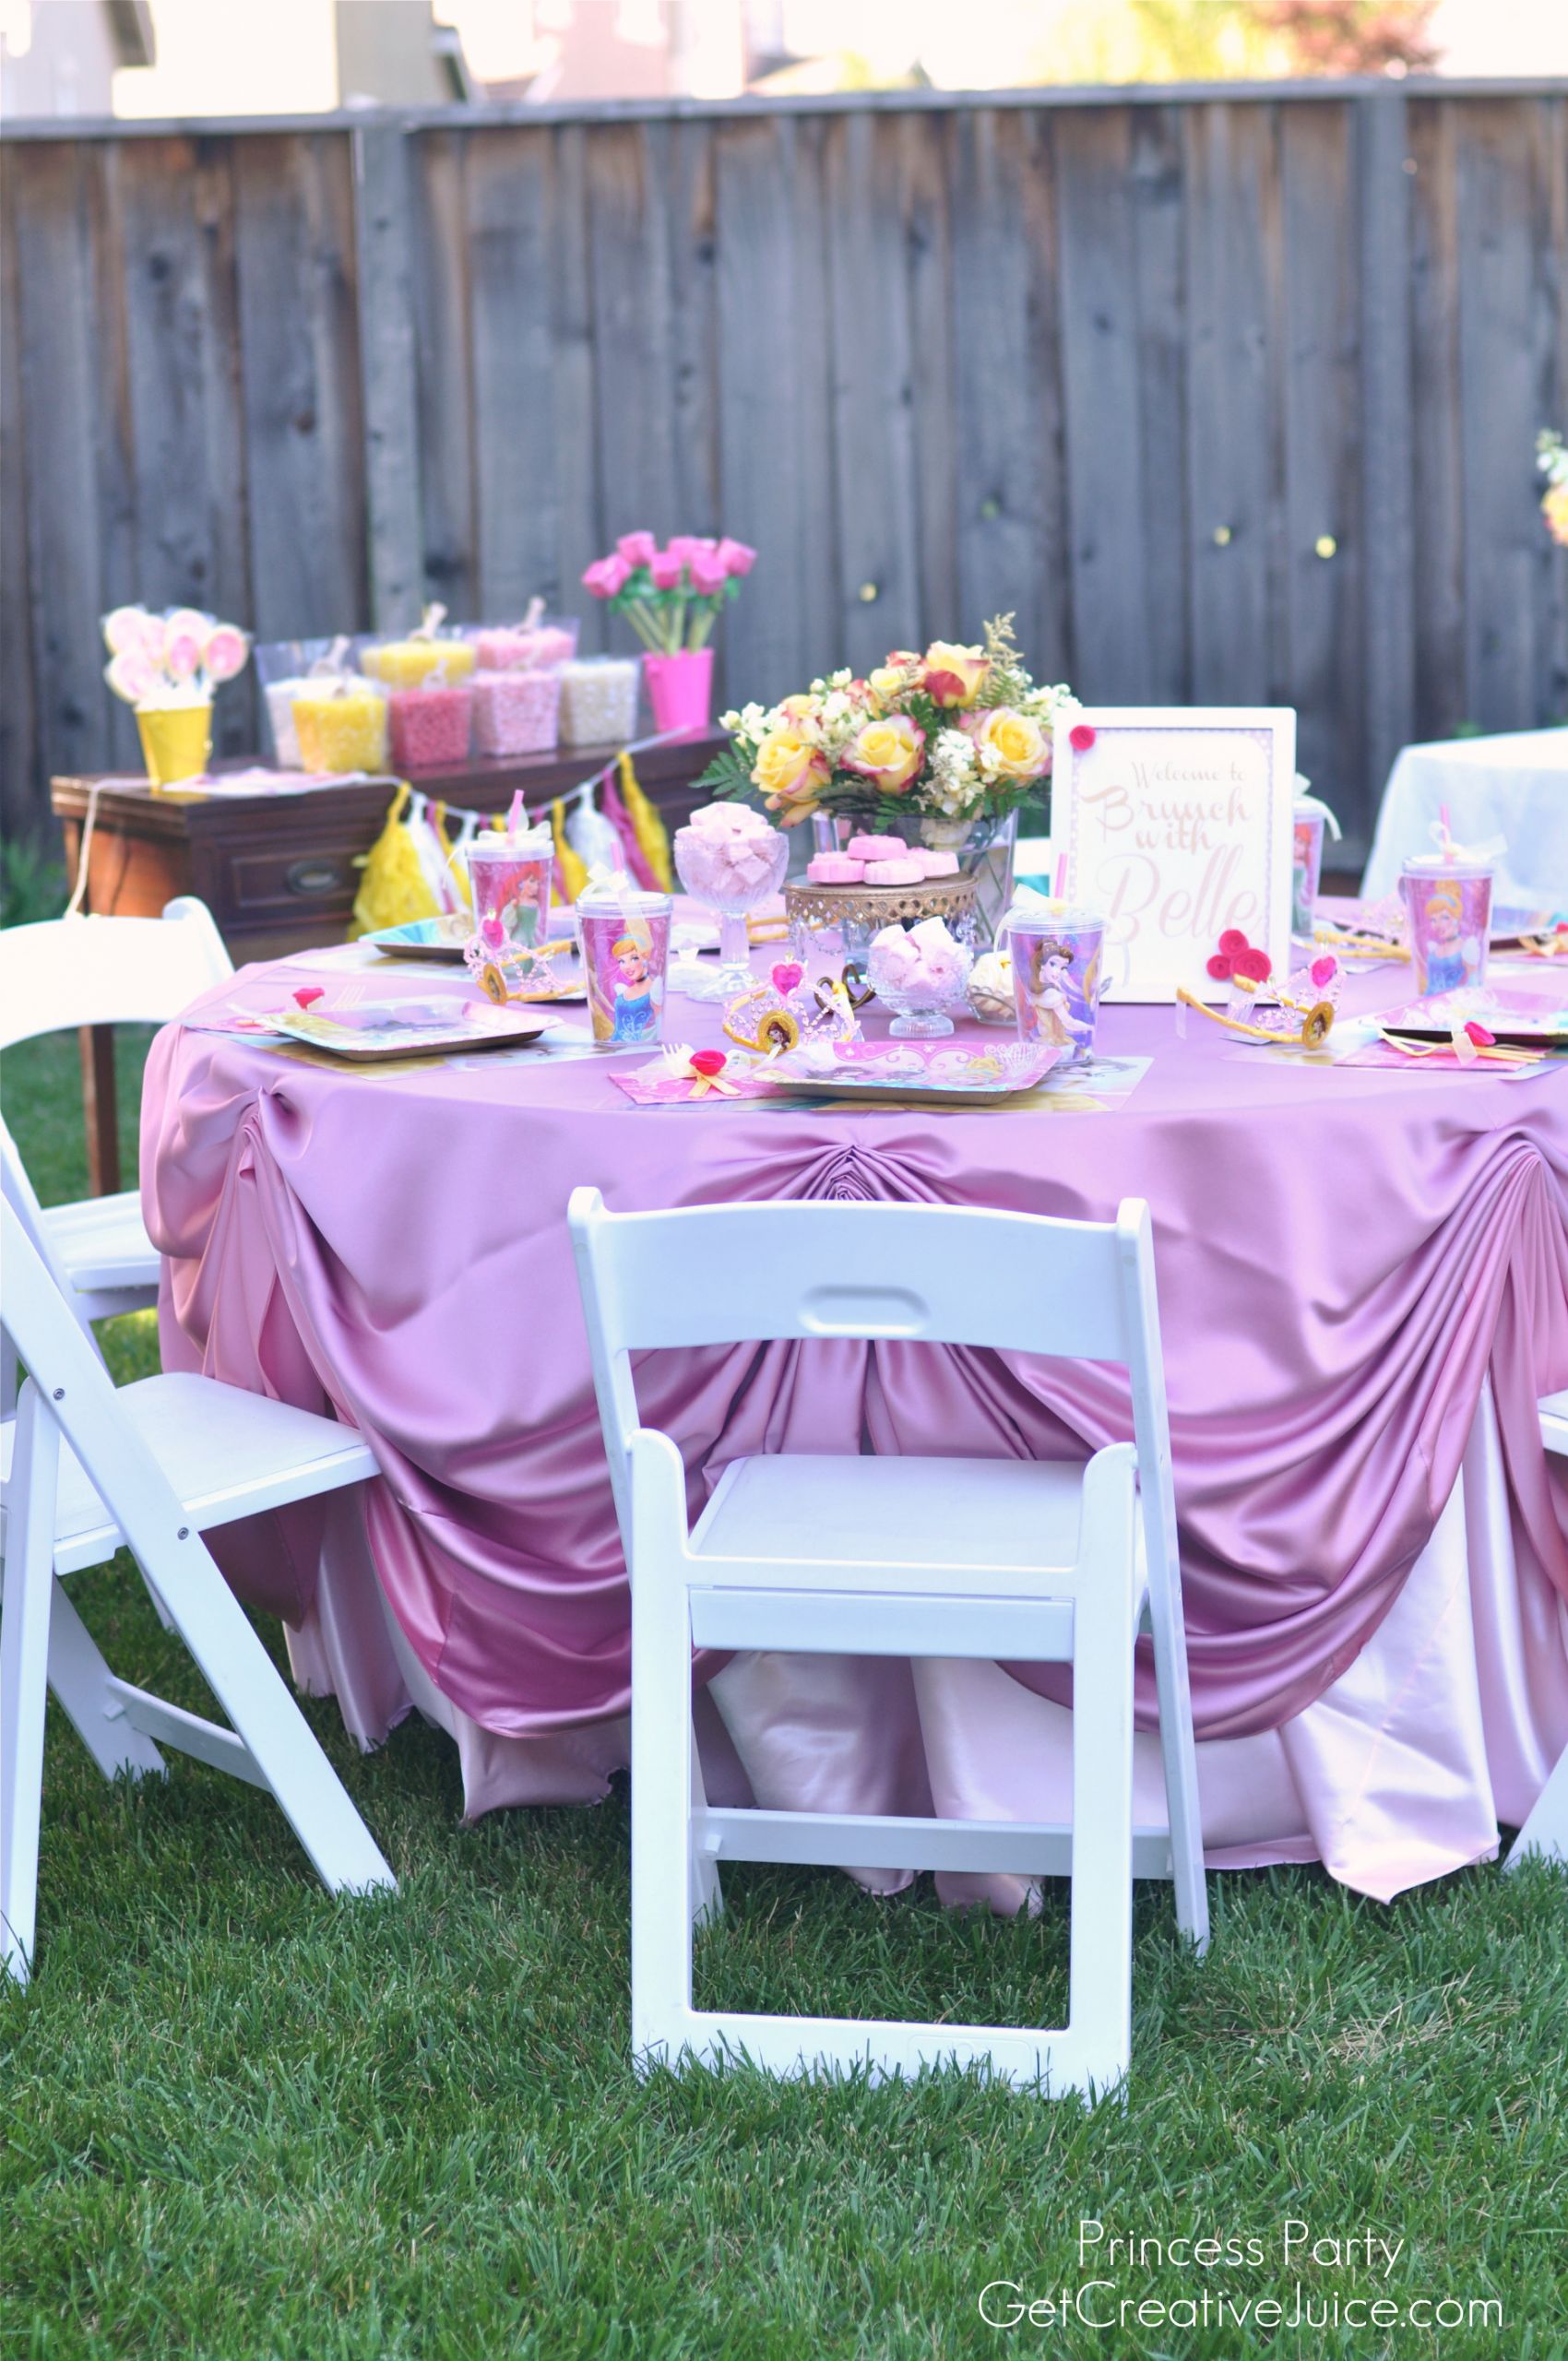 Table Decorations For Birthday Party
 Disney Princess Party with Belle Part e Creative Juice